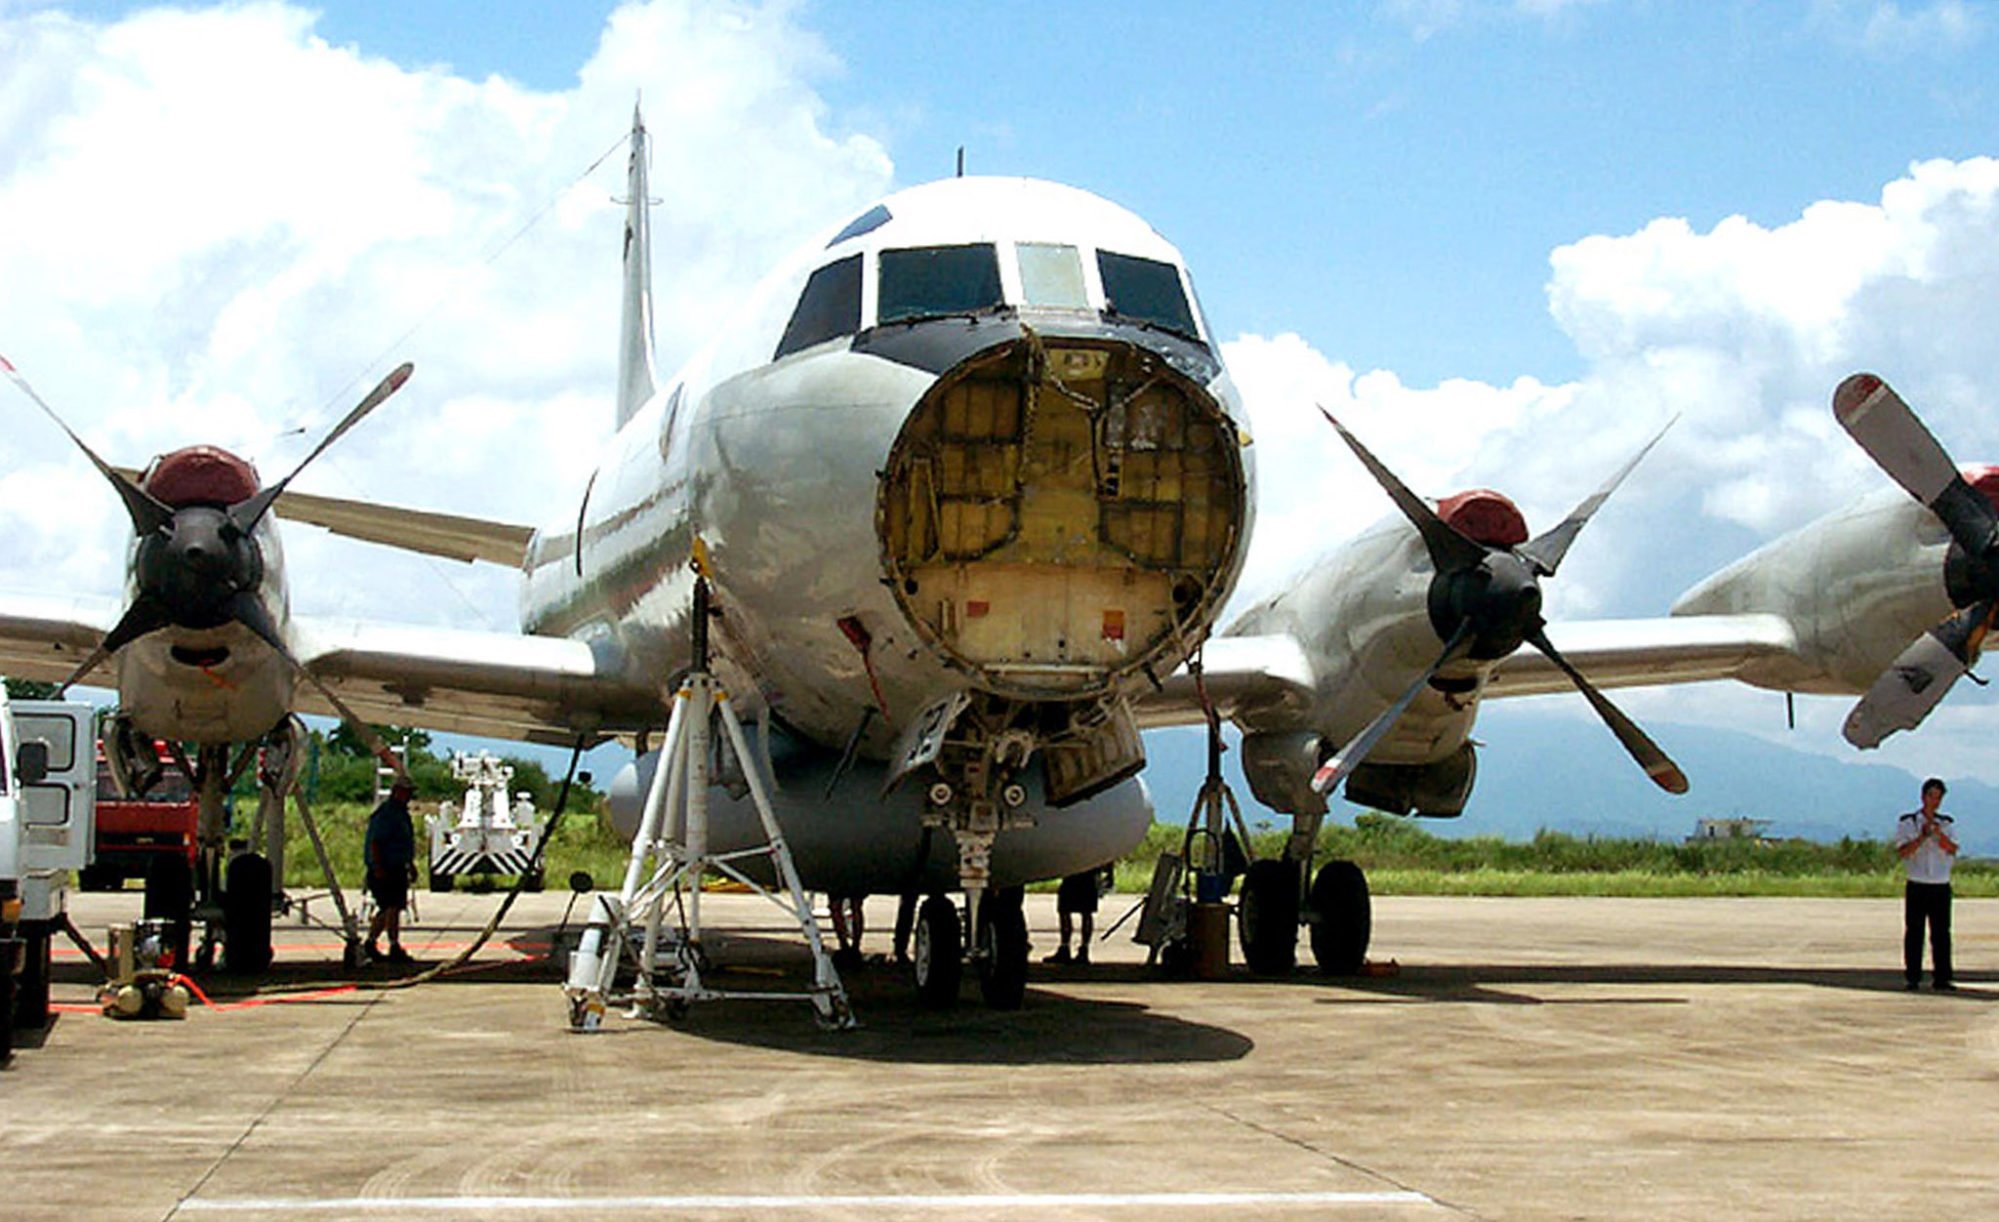 A Lockheed Martin Aeronautics recovery team prepares to drain fuel, oil and hydraulic fluids from the damaged US Navy EP-3 surveillance plane at Lingshui Airfield on Hainan island in June 2001. Photo: Handout